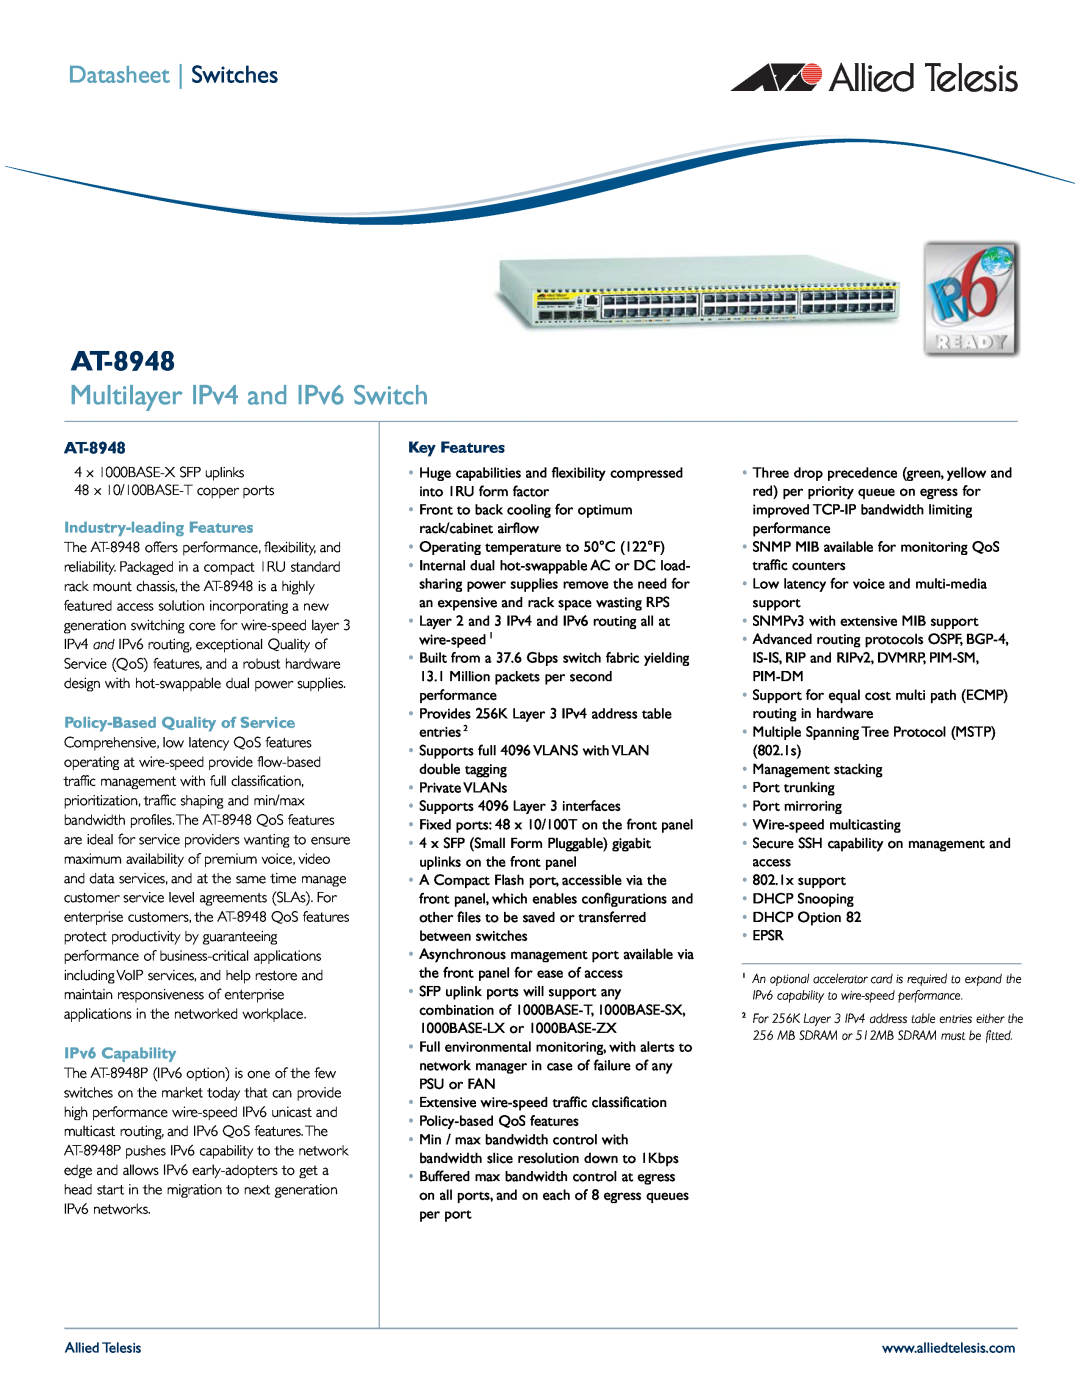 Allied Telesis IPV6 manual MultiIayer IPv4 and IPv6 Switch, AT-8948, Datasheet Switches, Key Features 